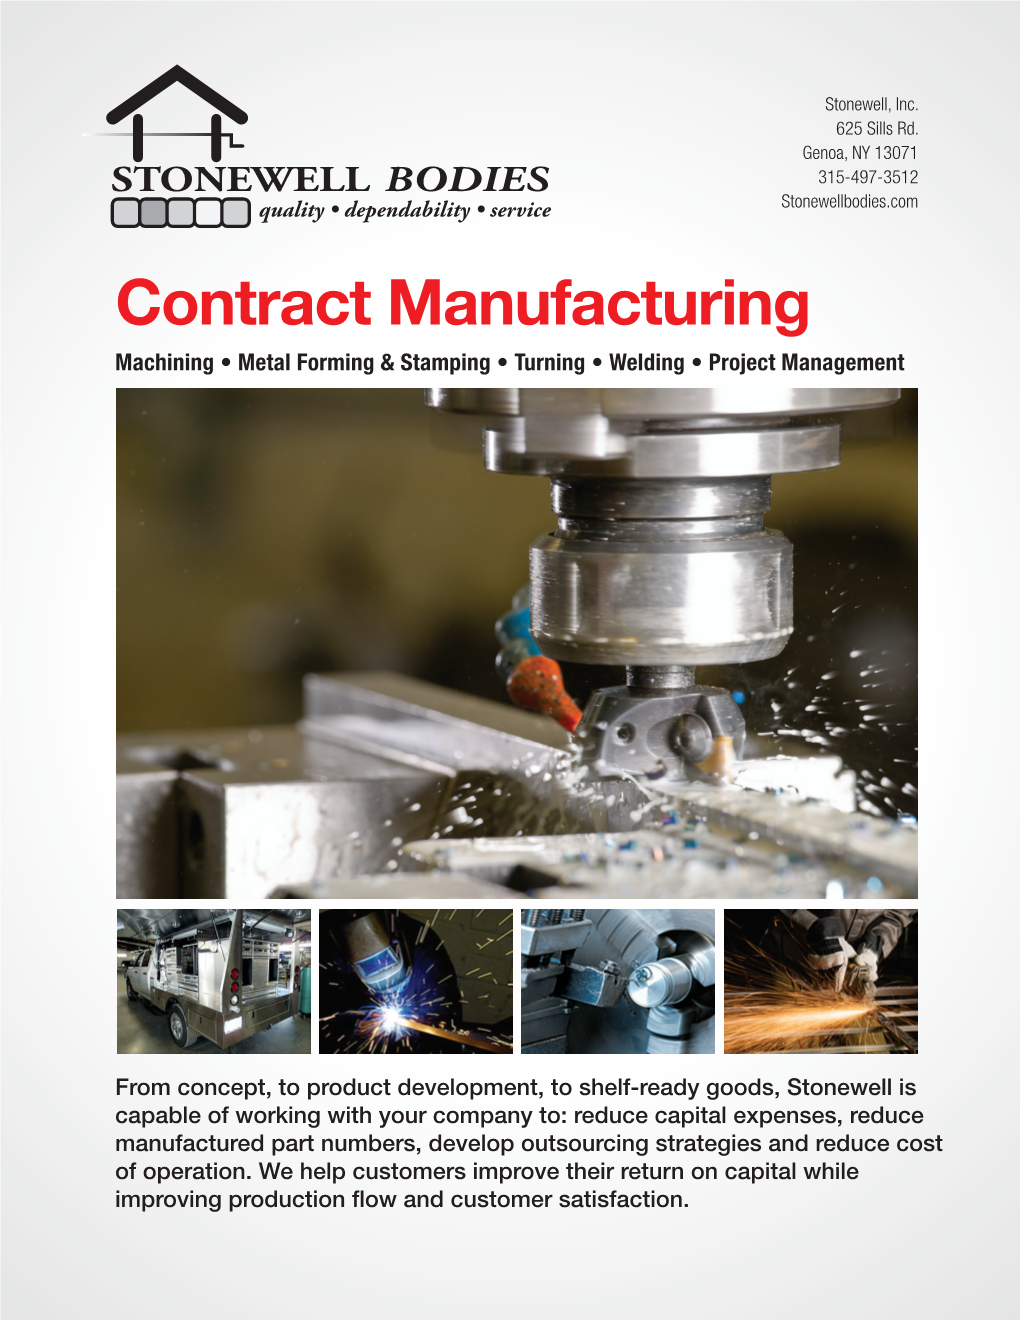 Contract Manufacturing Machining • Metal Forming & Stamping • Turning • Welding • Project Management